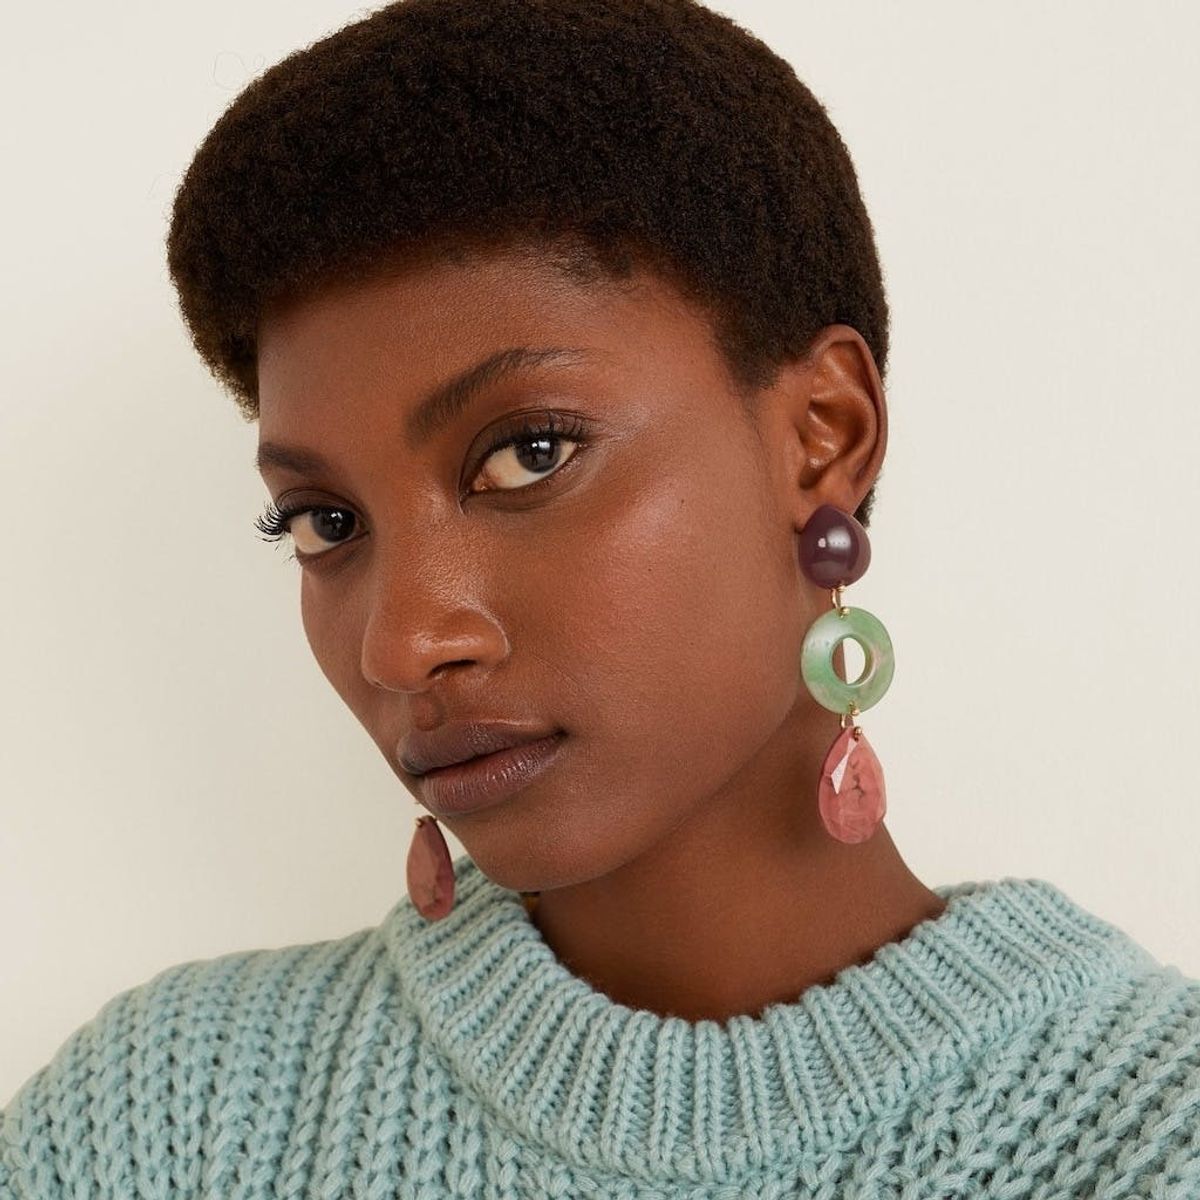 This Resin Earring Trend Will Be Your Go-To Spring Style Staple - Brit + Co